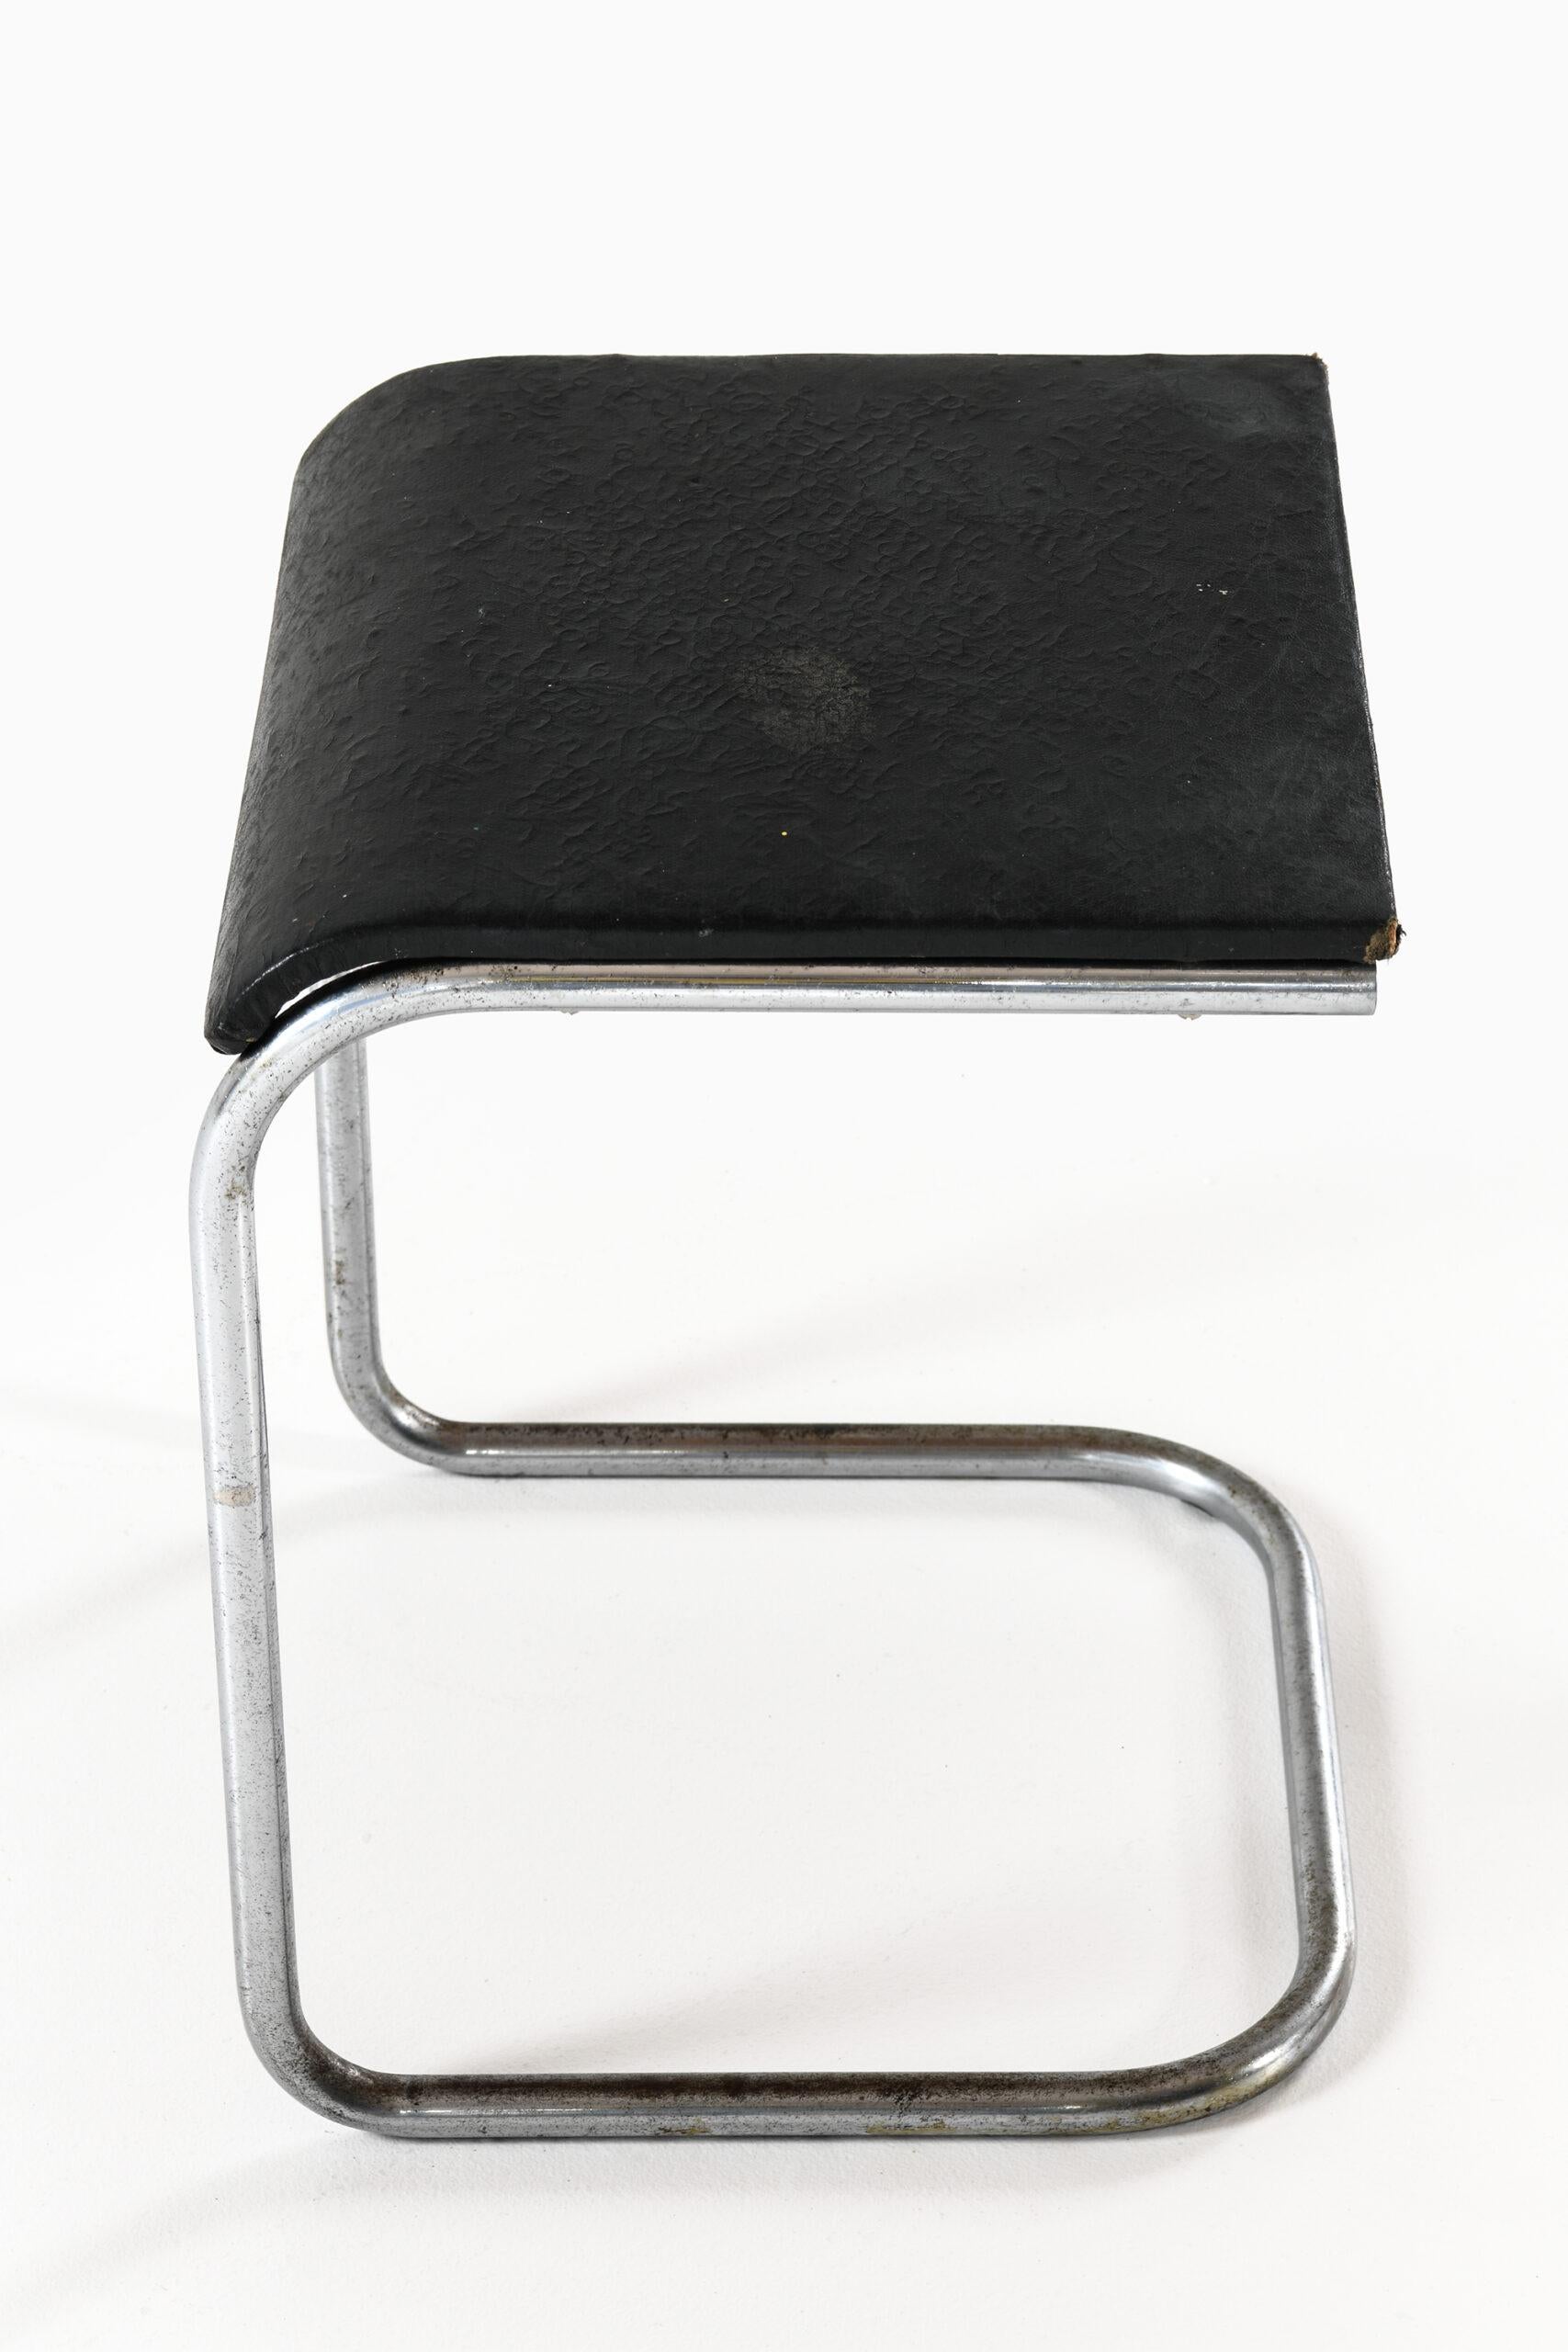 Scandinavian Modern Stools Probably Produced in Sweden For Sale